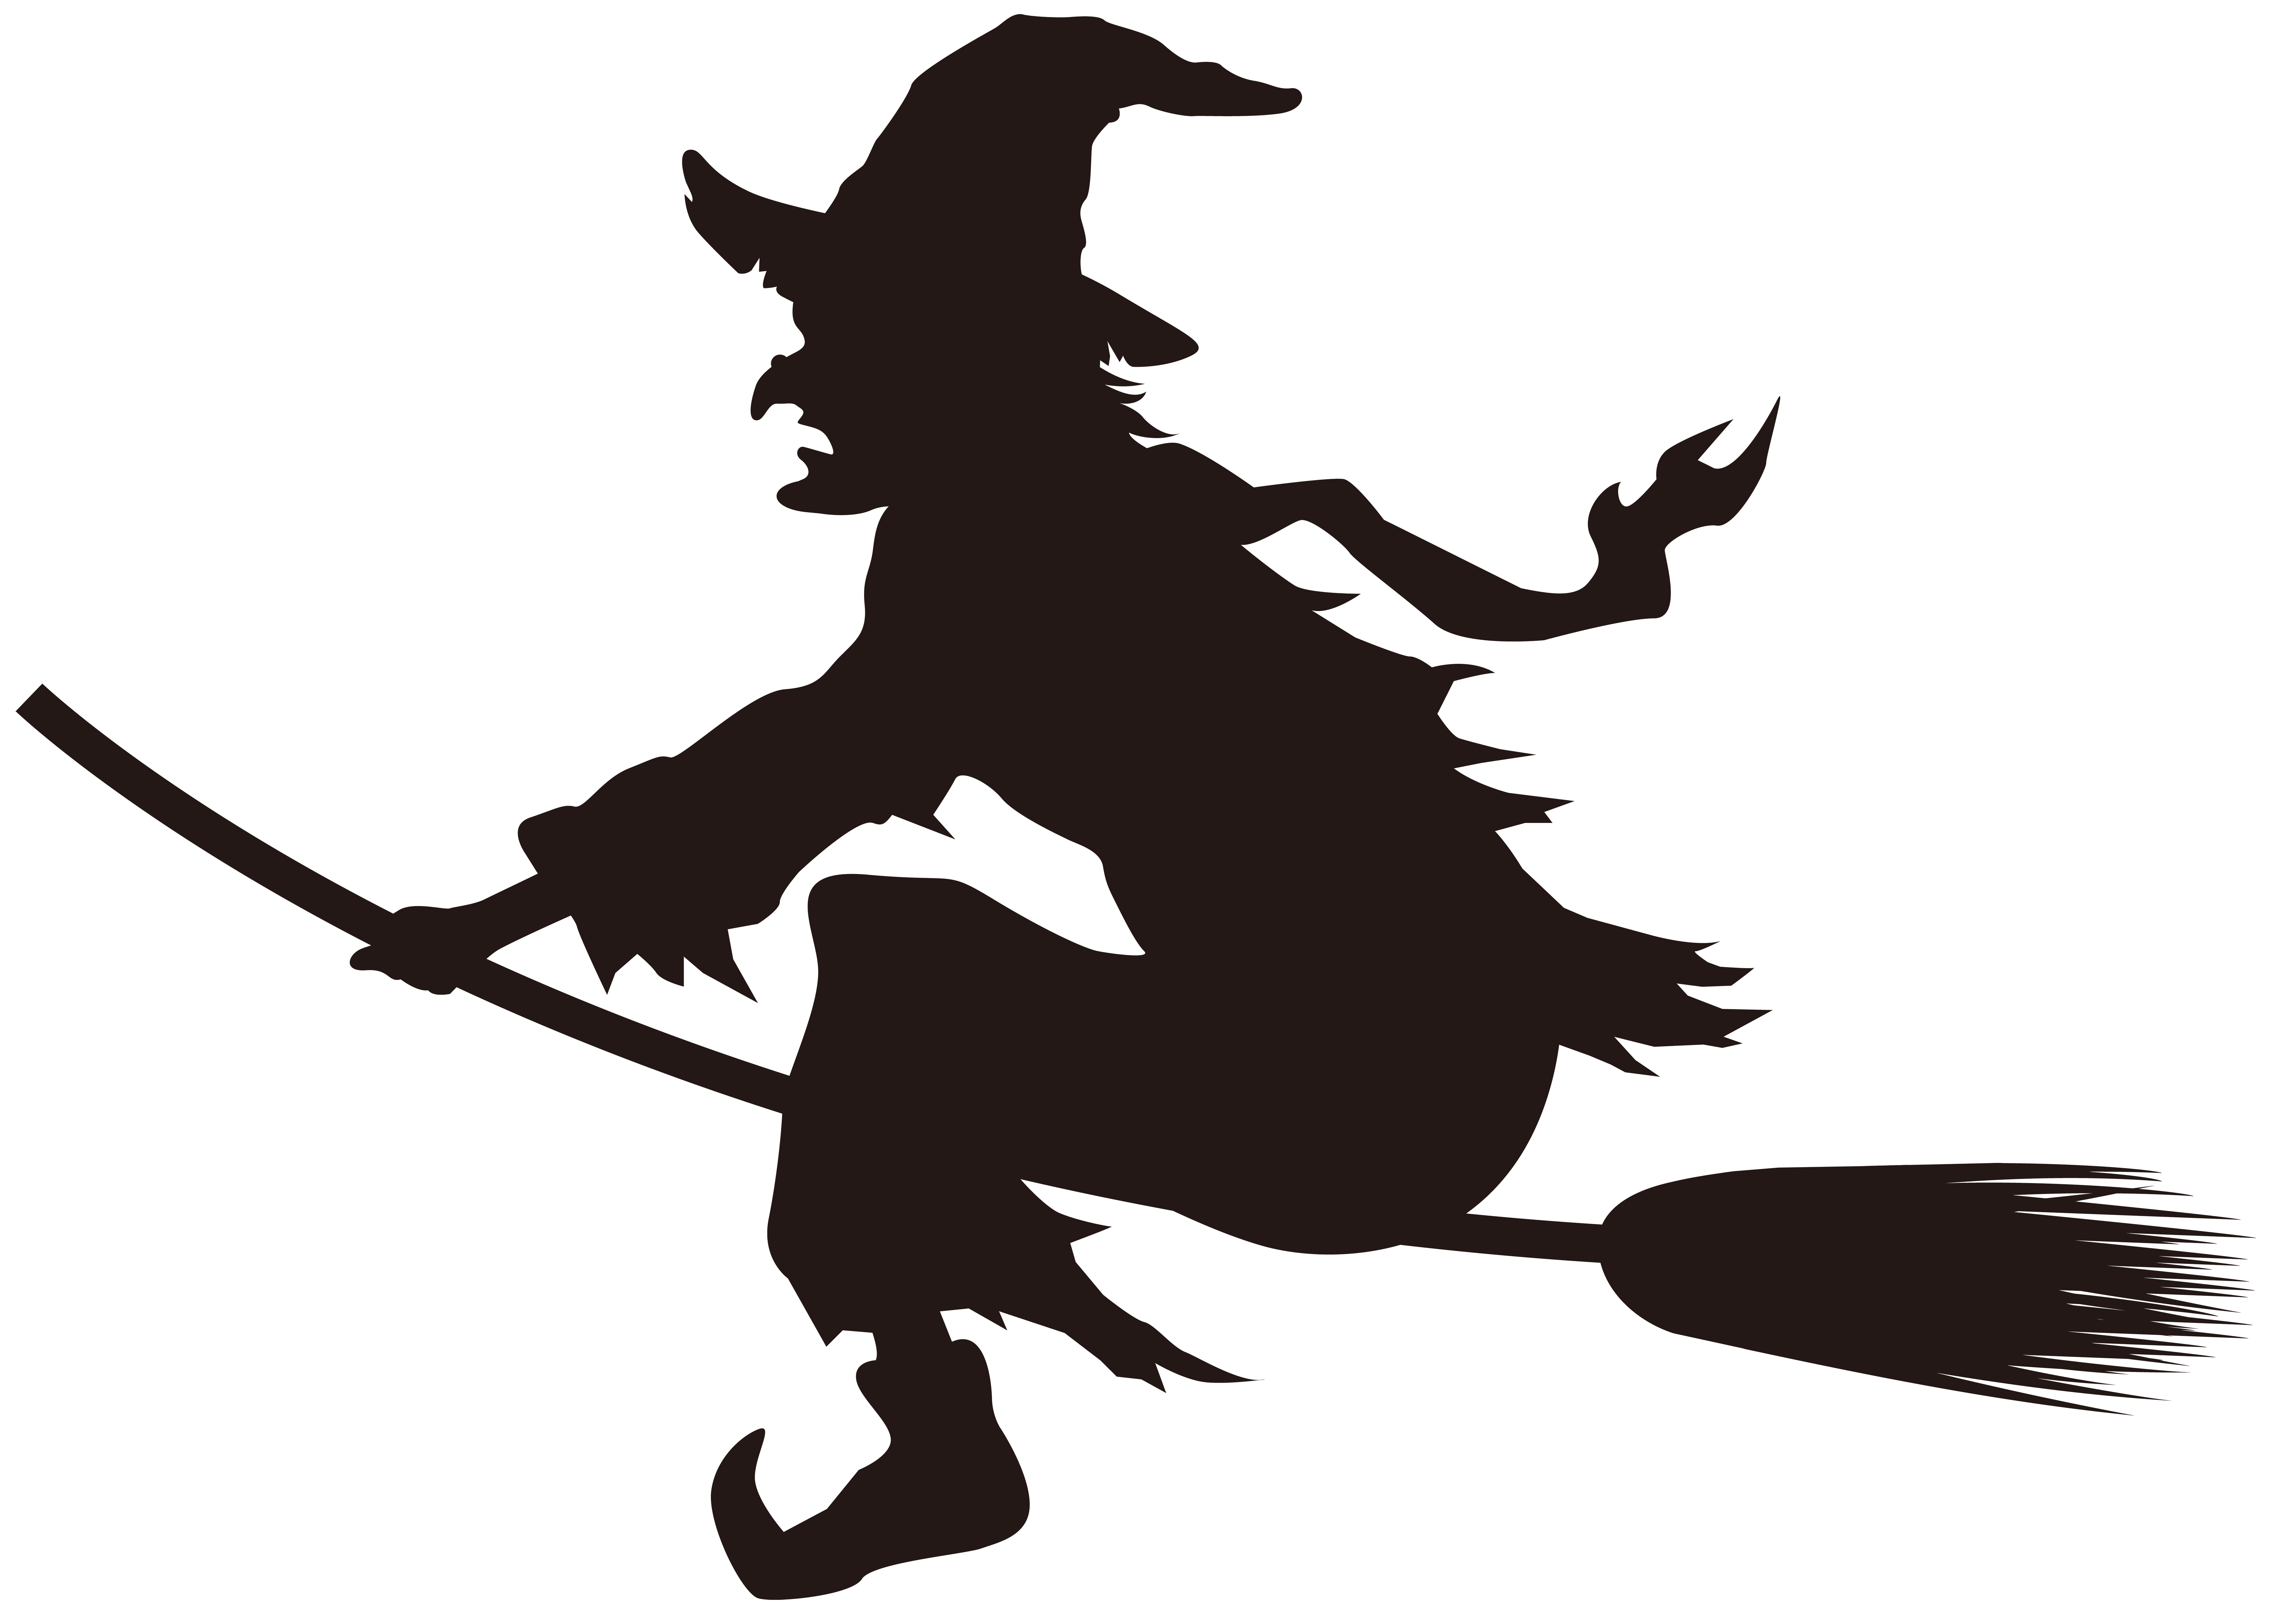 On Silhouette Witchcraft Broom Halloween Scalable Vector Clipart